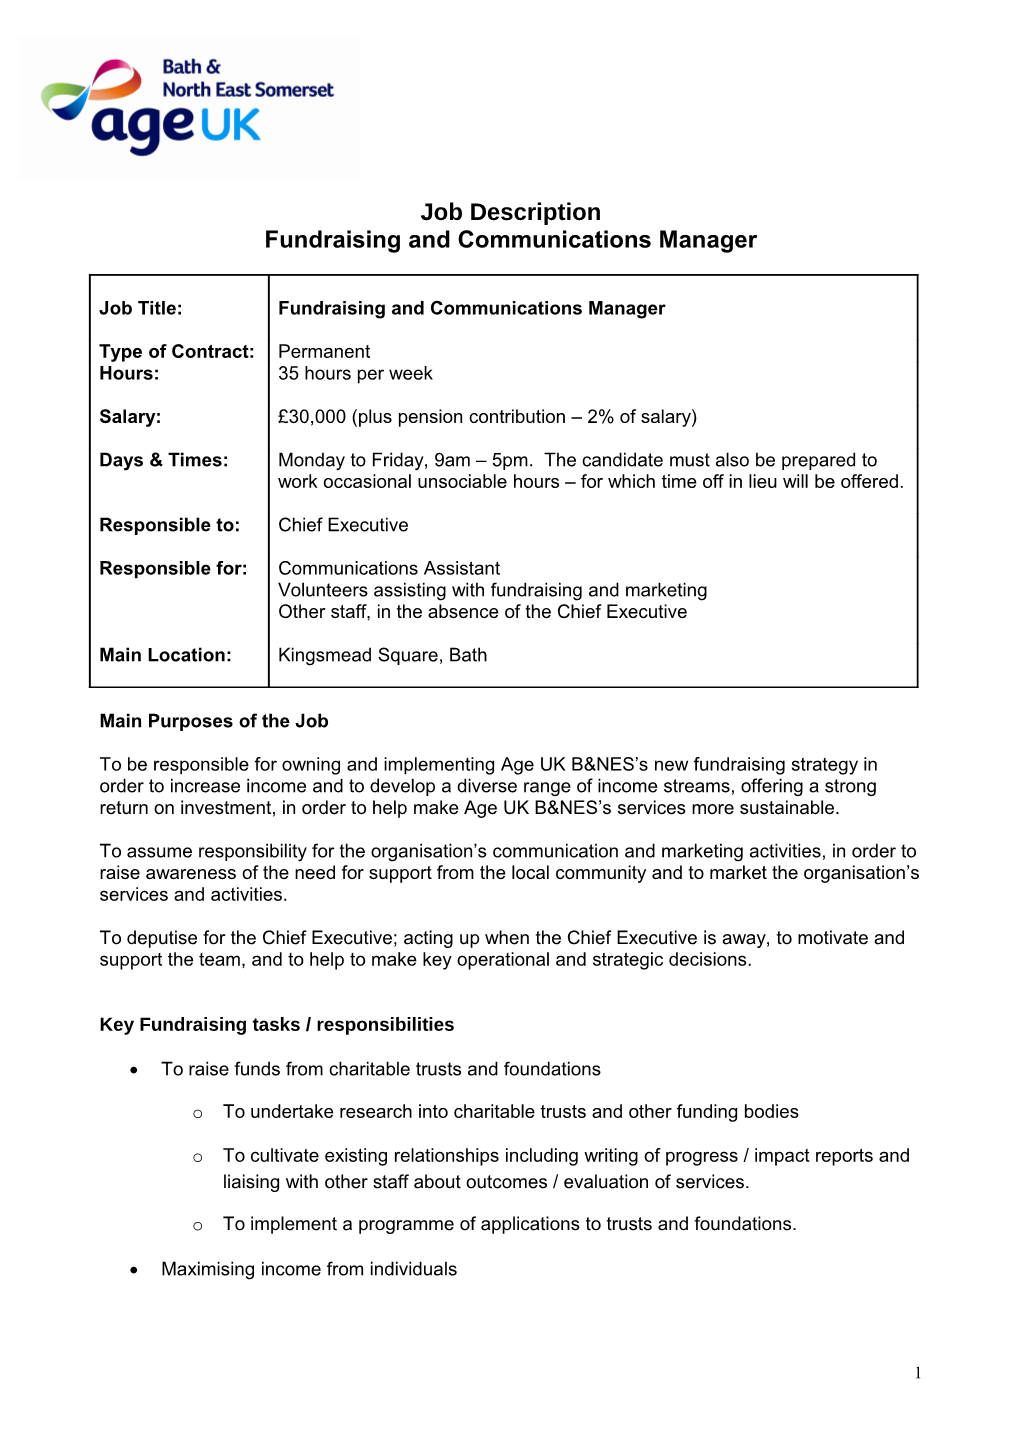 Fundraising and Communications Manager